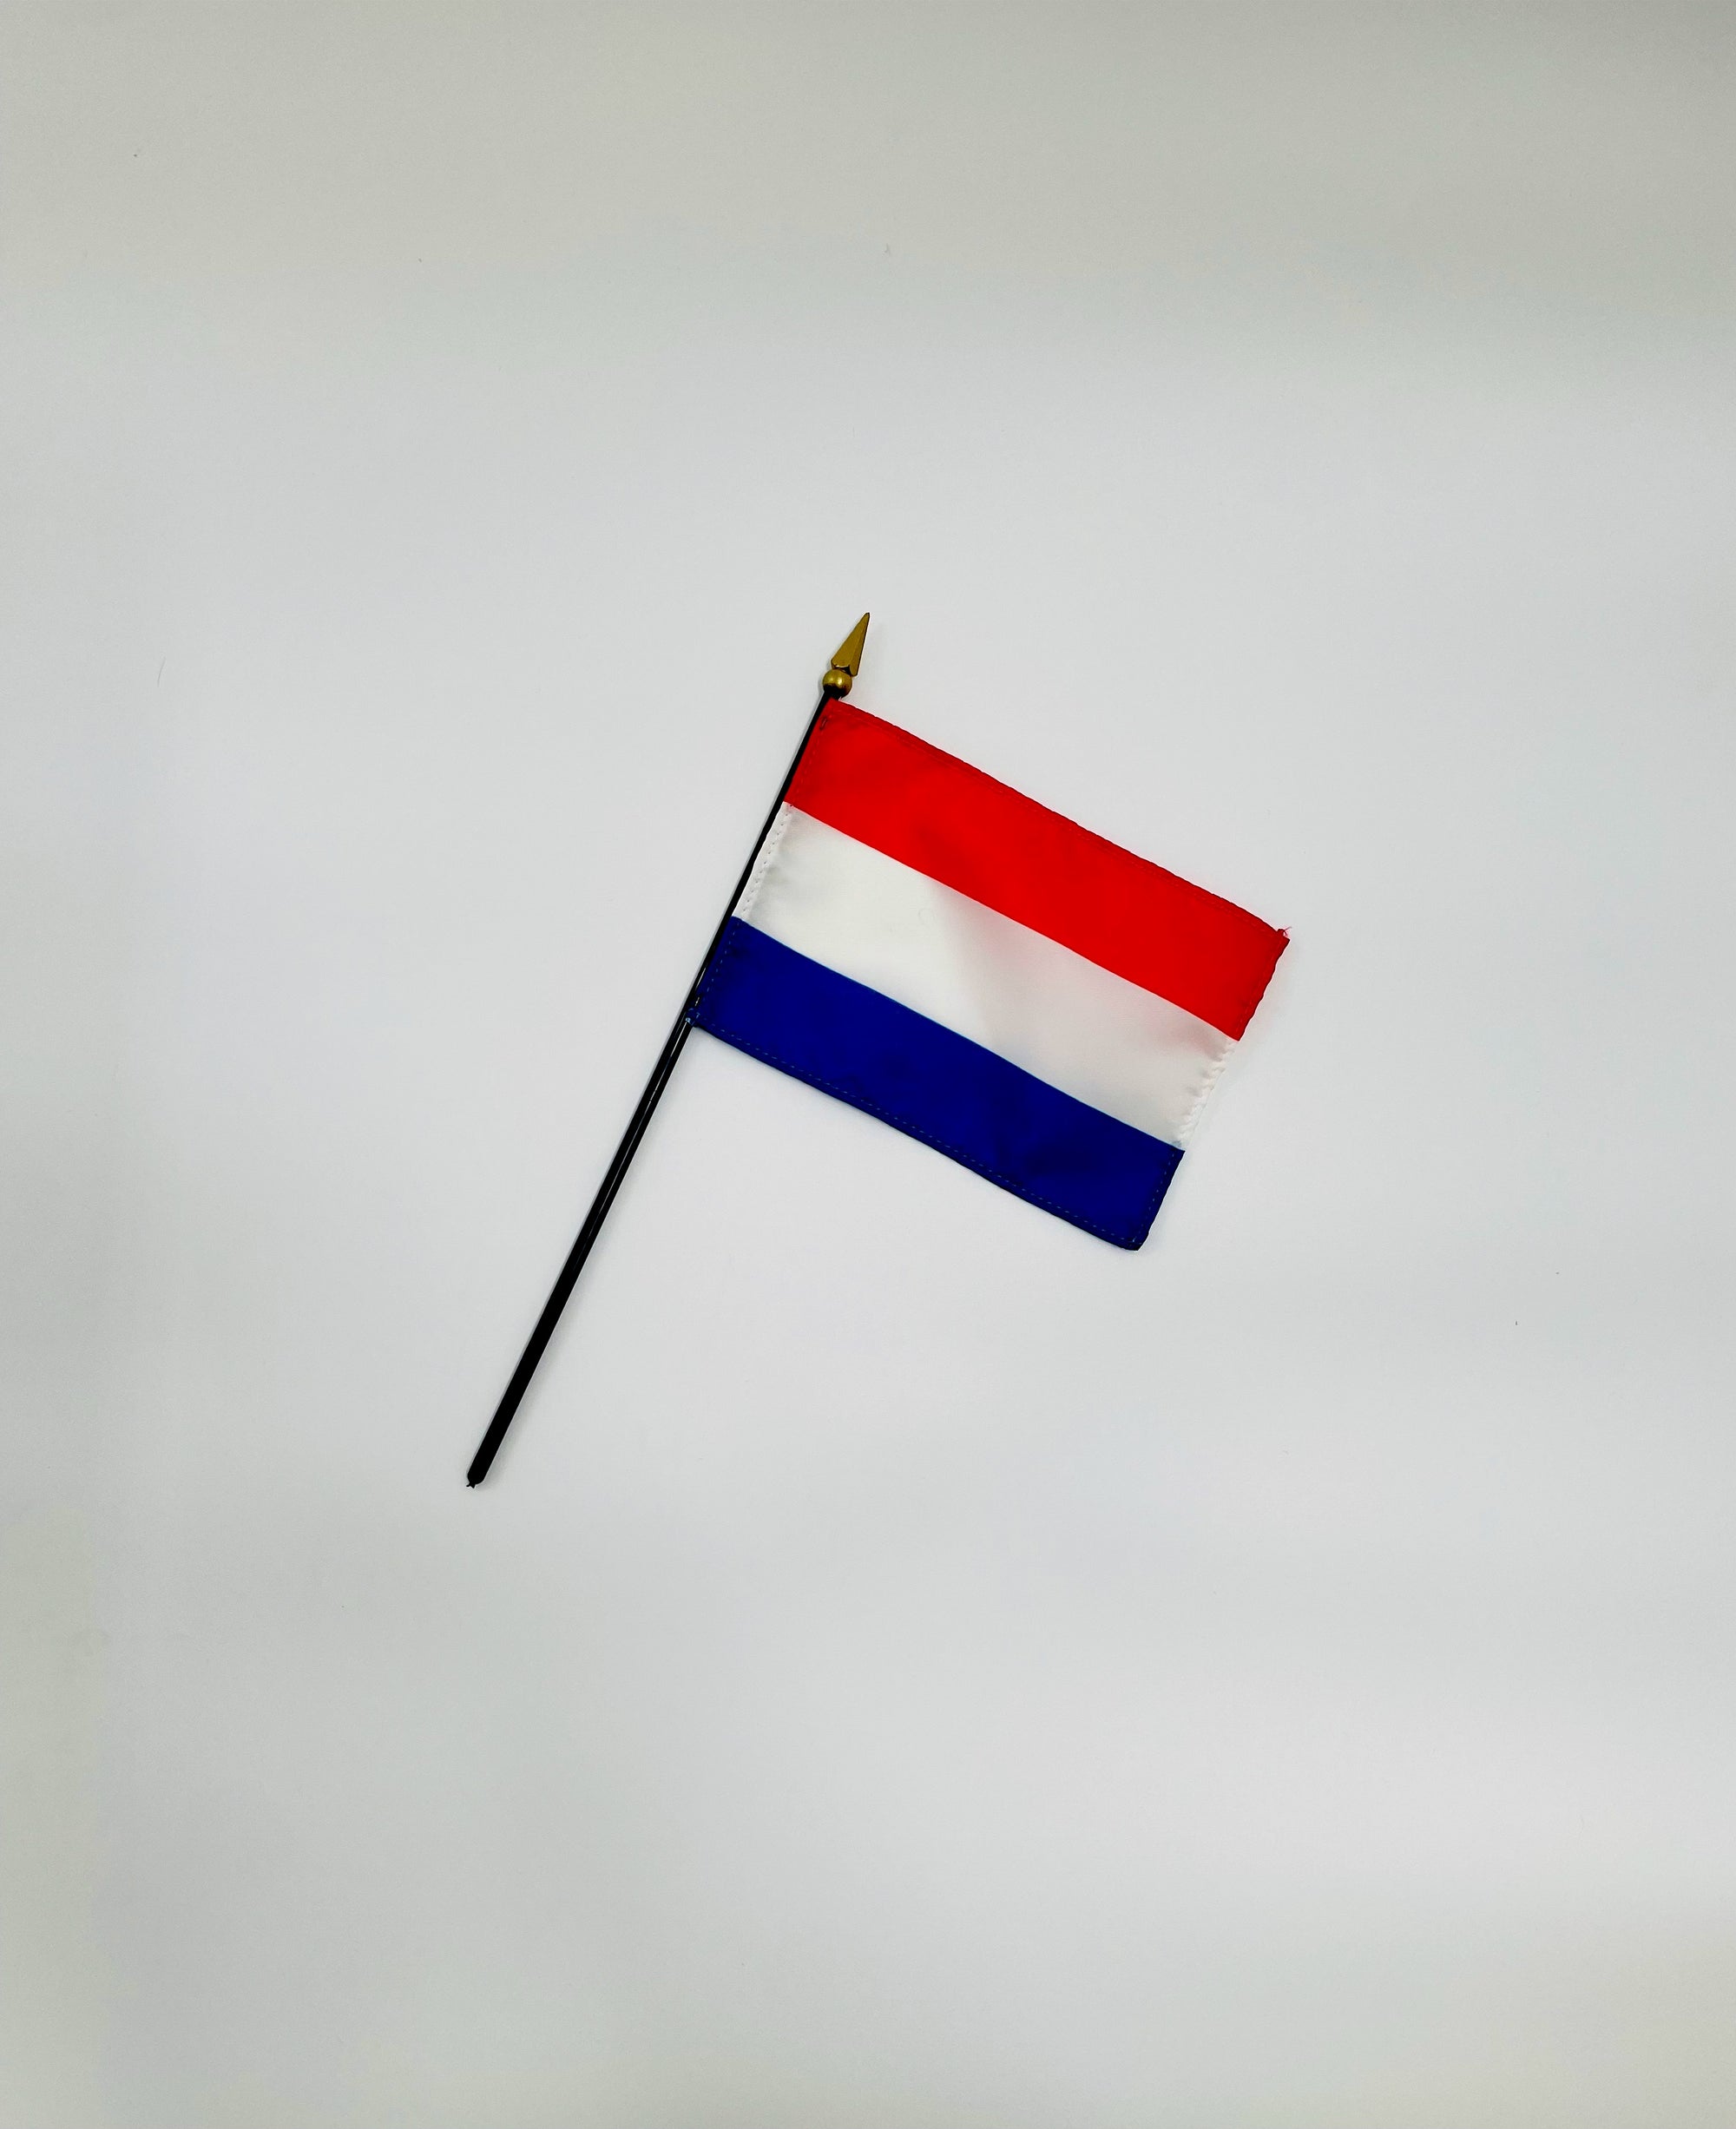 Netherlands 4" x 6" Mounted Stick Flags